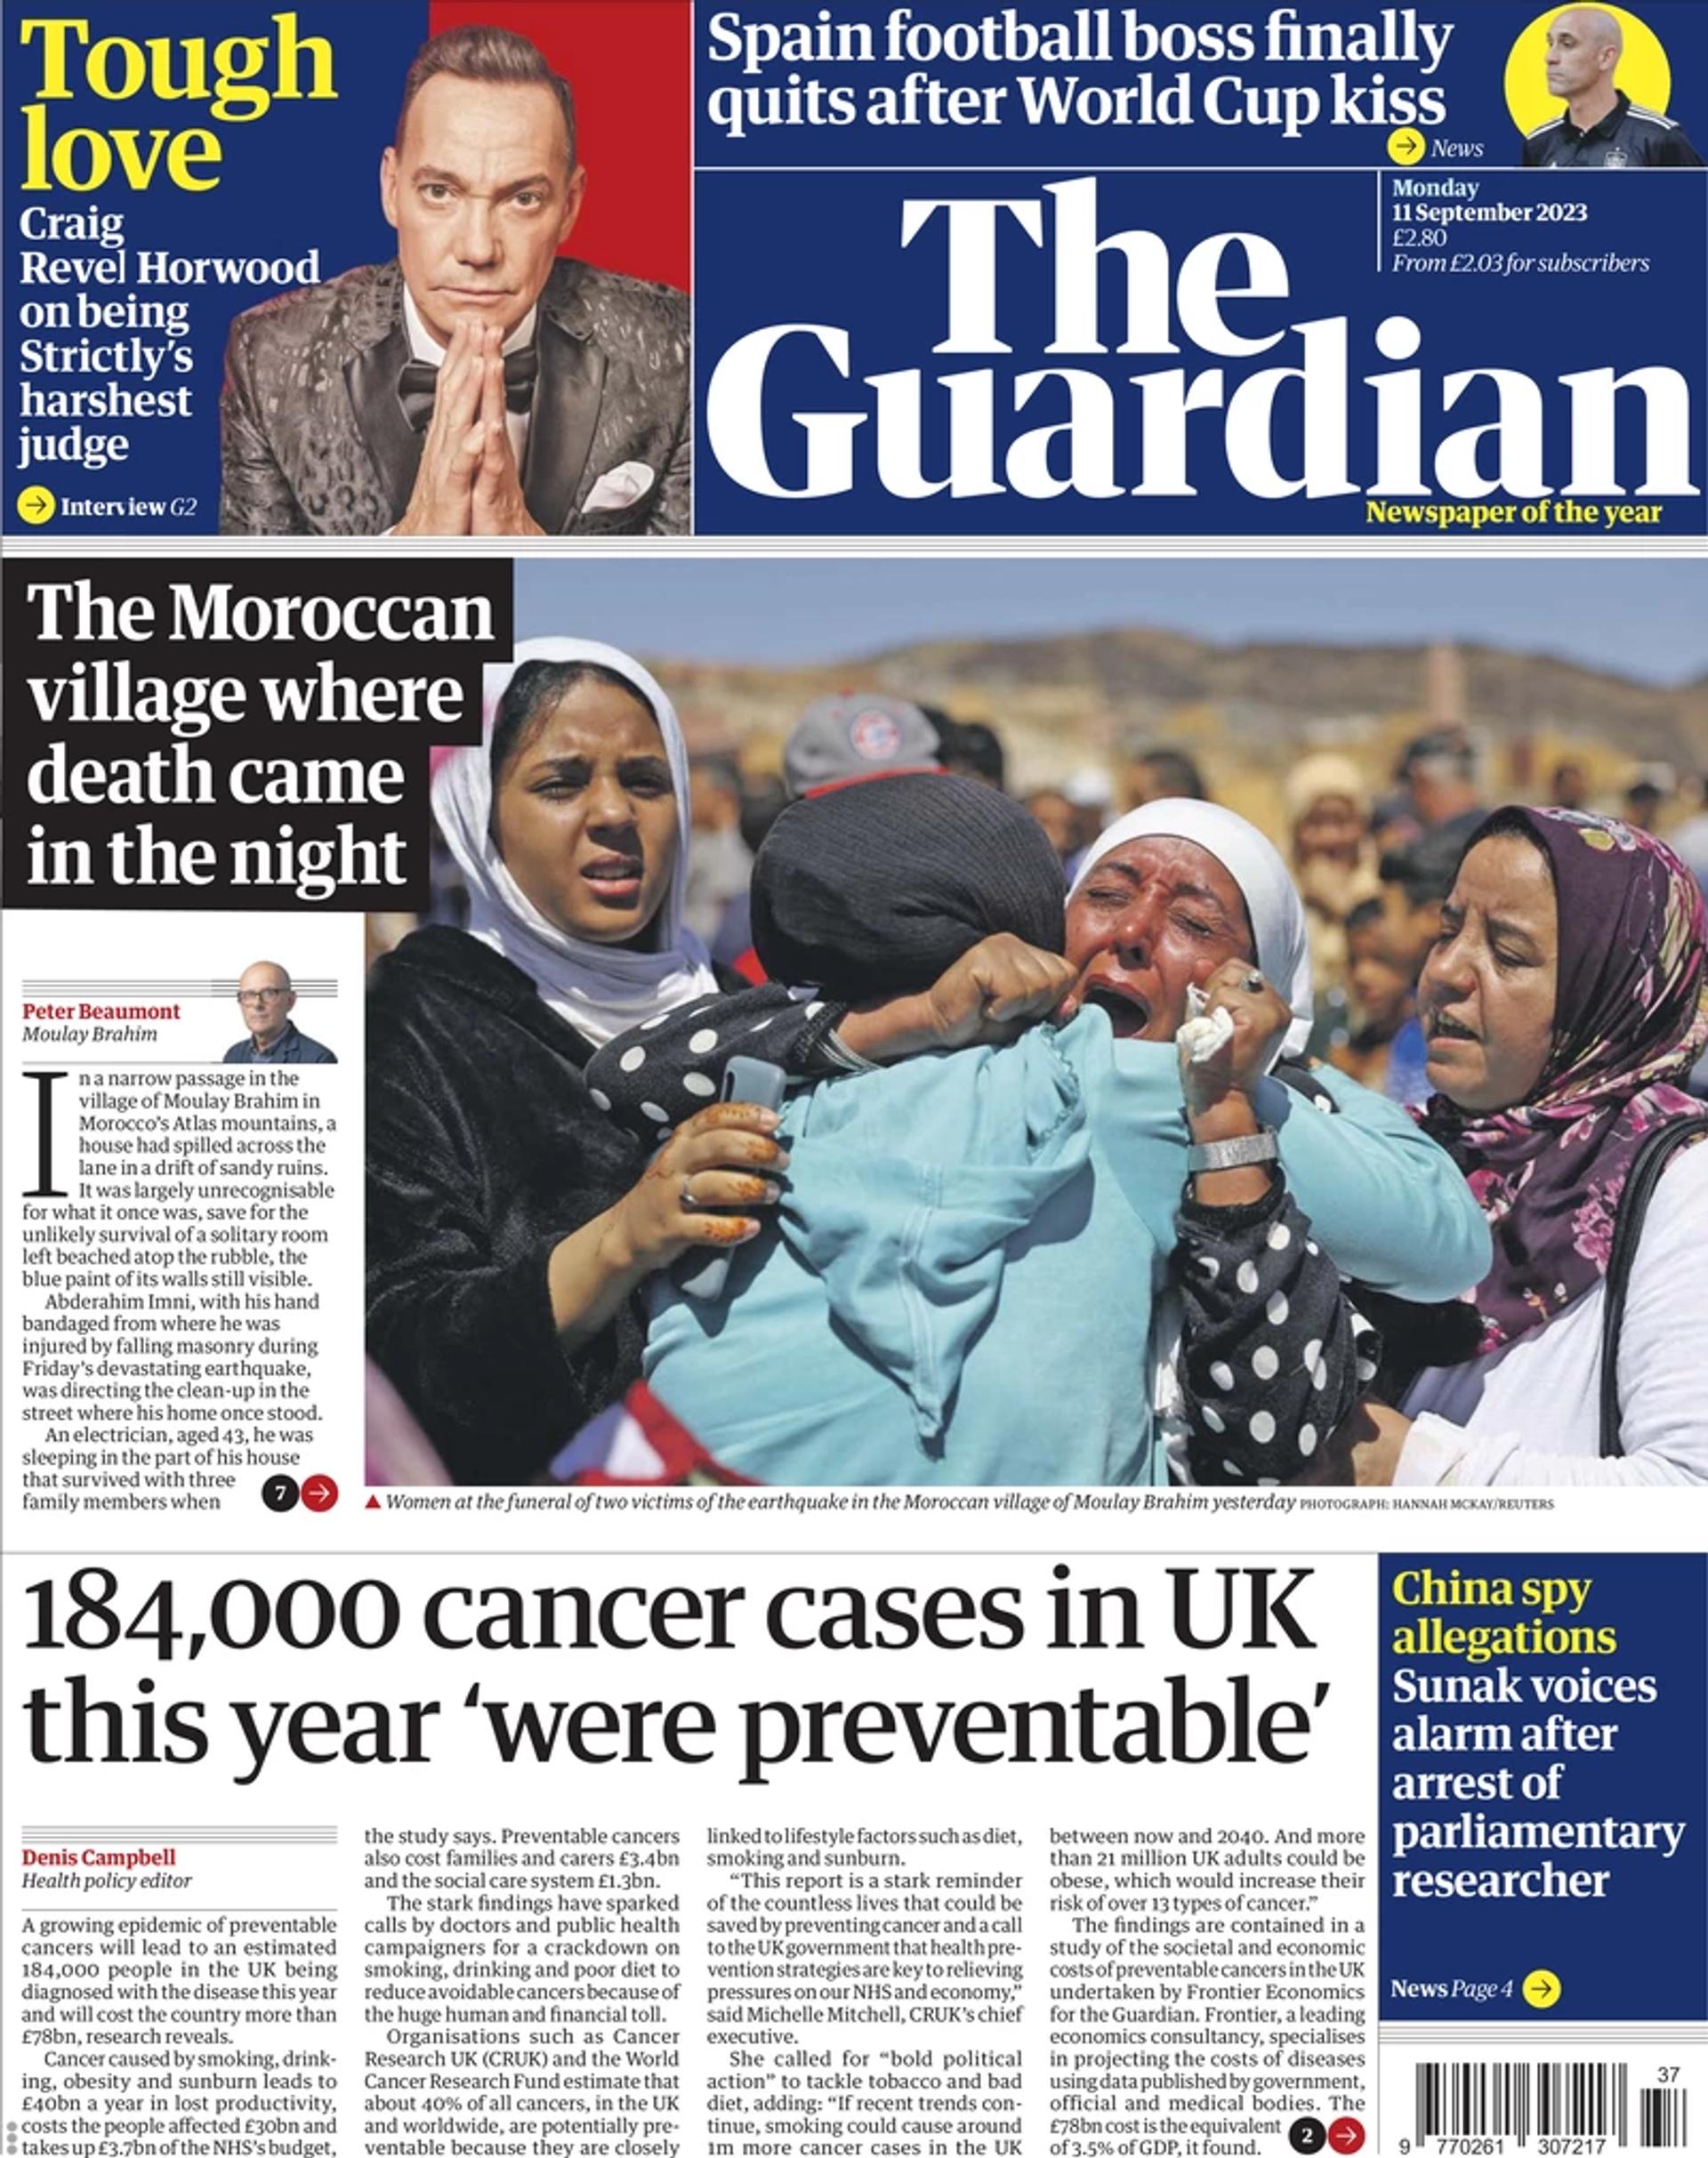 The front page of the Guardian for Sept. 11, 2023